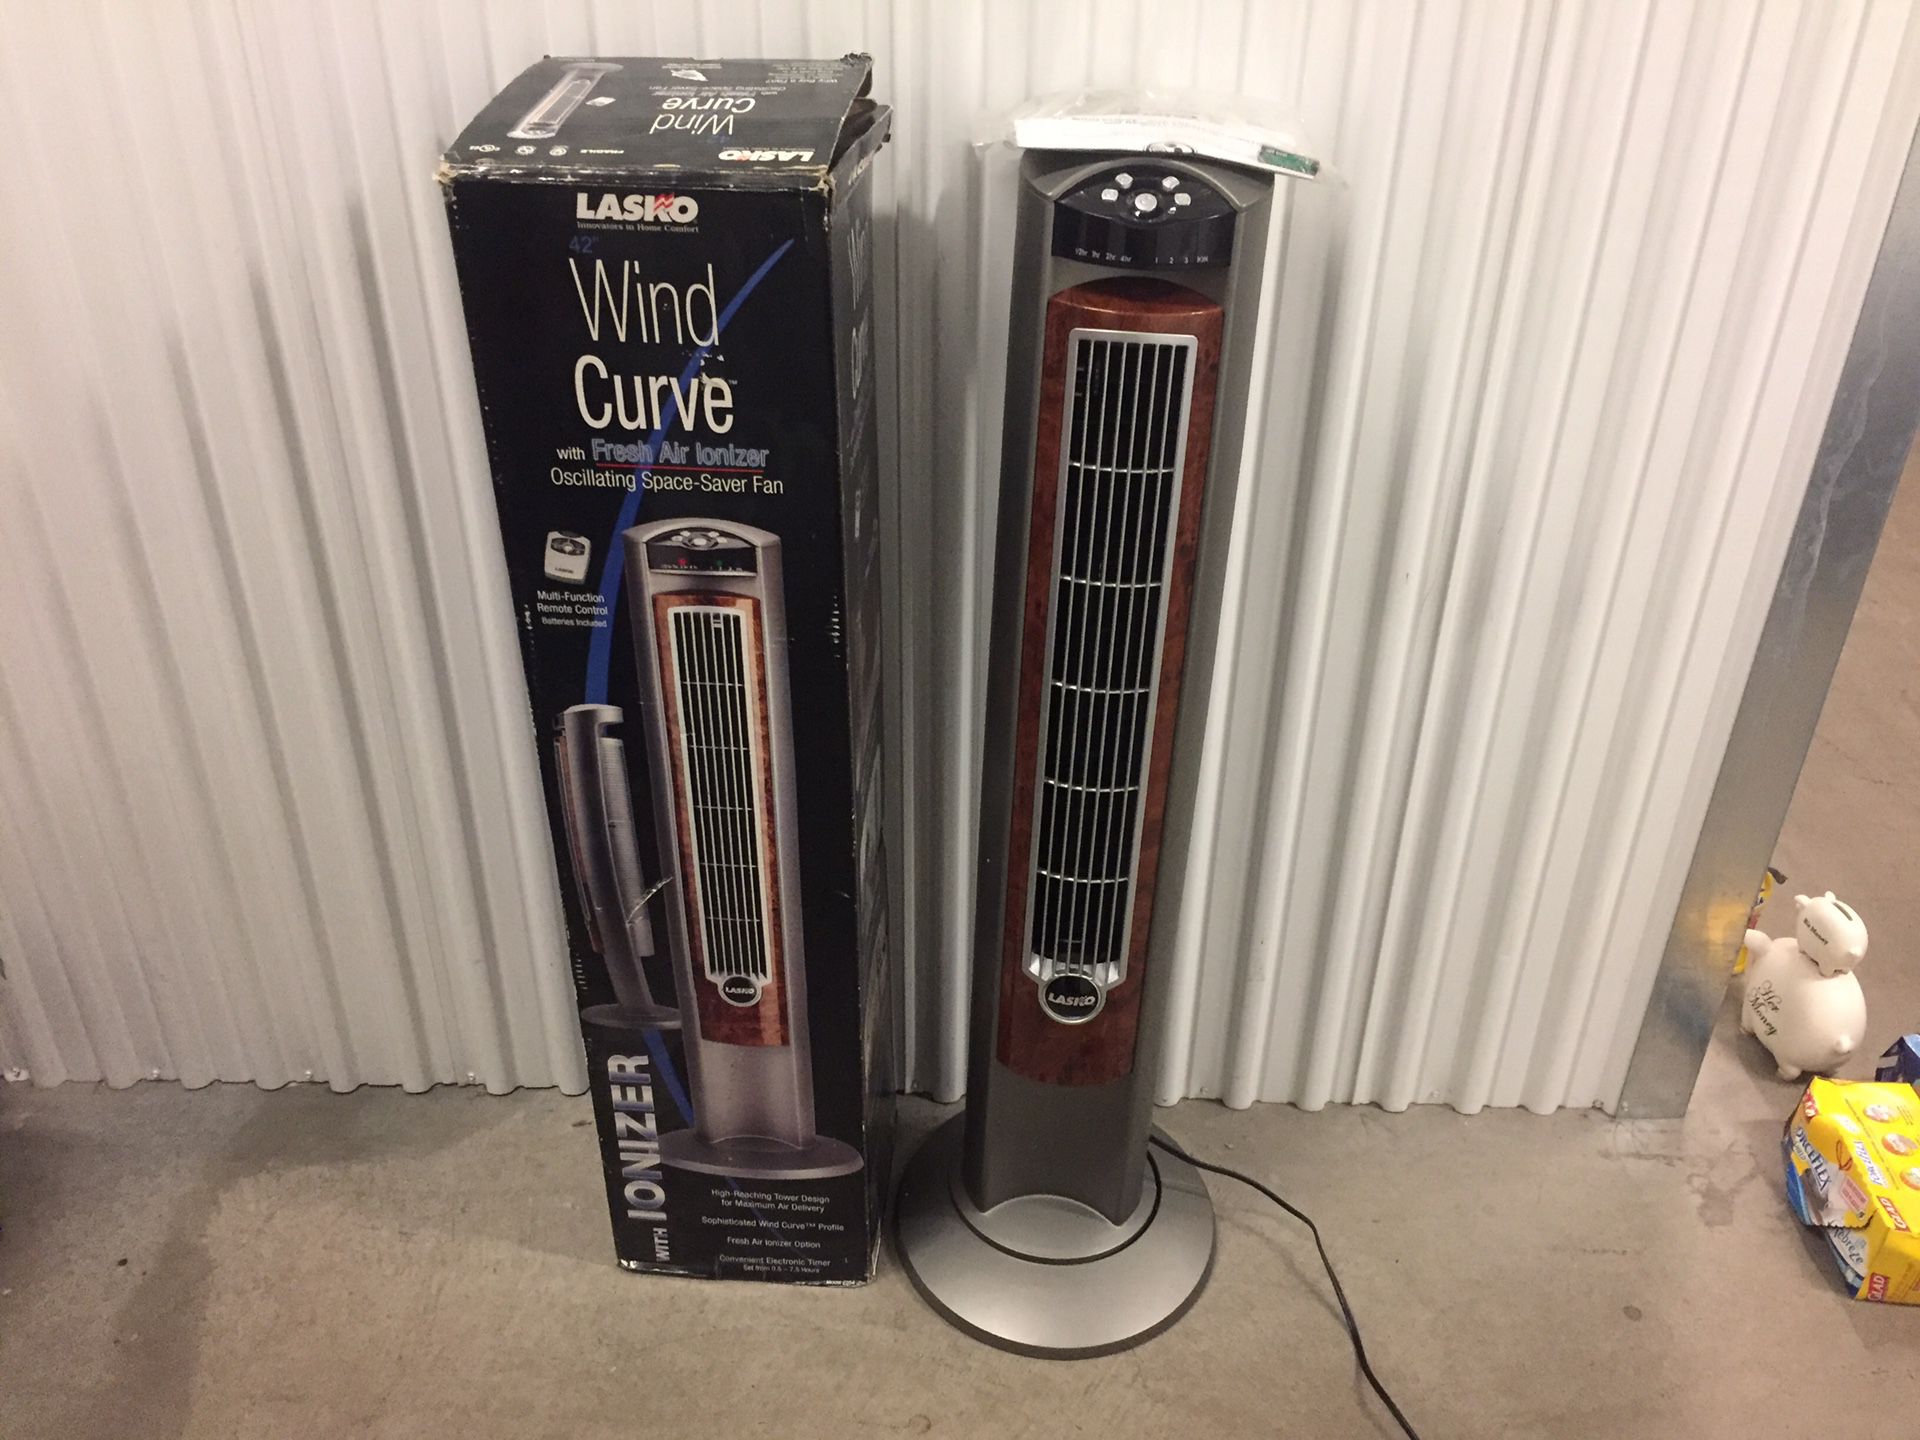 lasko wind curve Oscillating Tower Fan With ionizer ( used for 1 hour) Like new